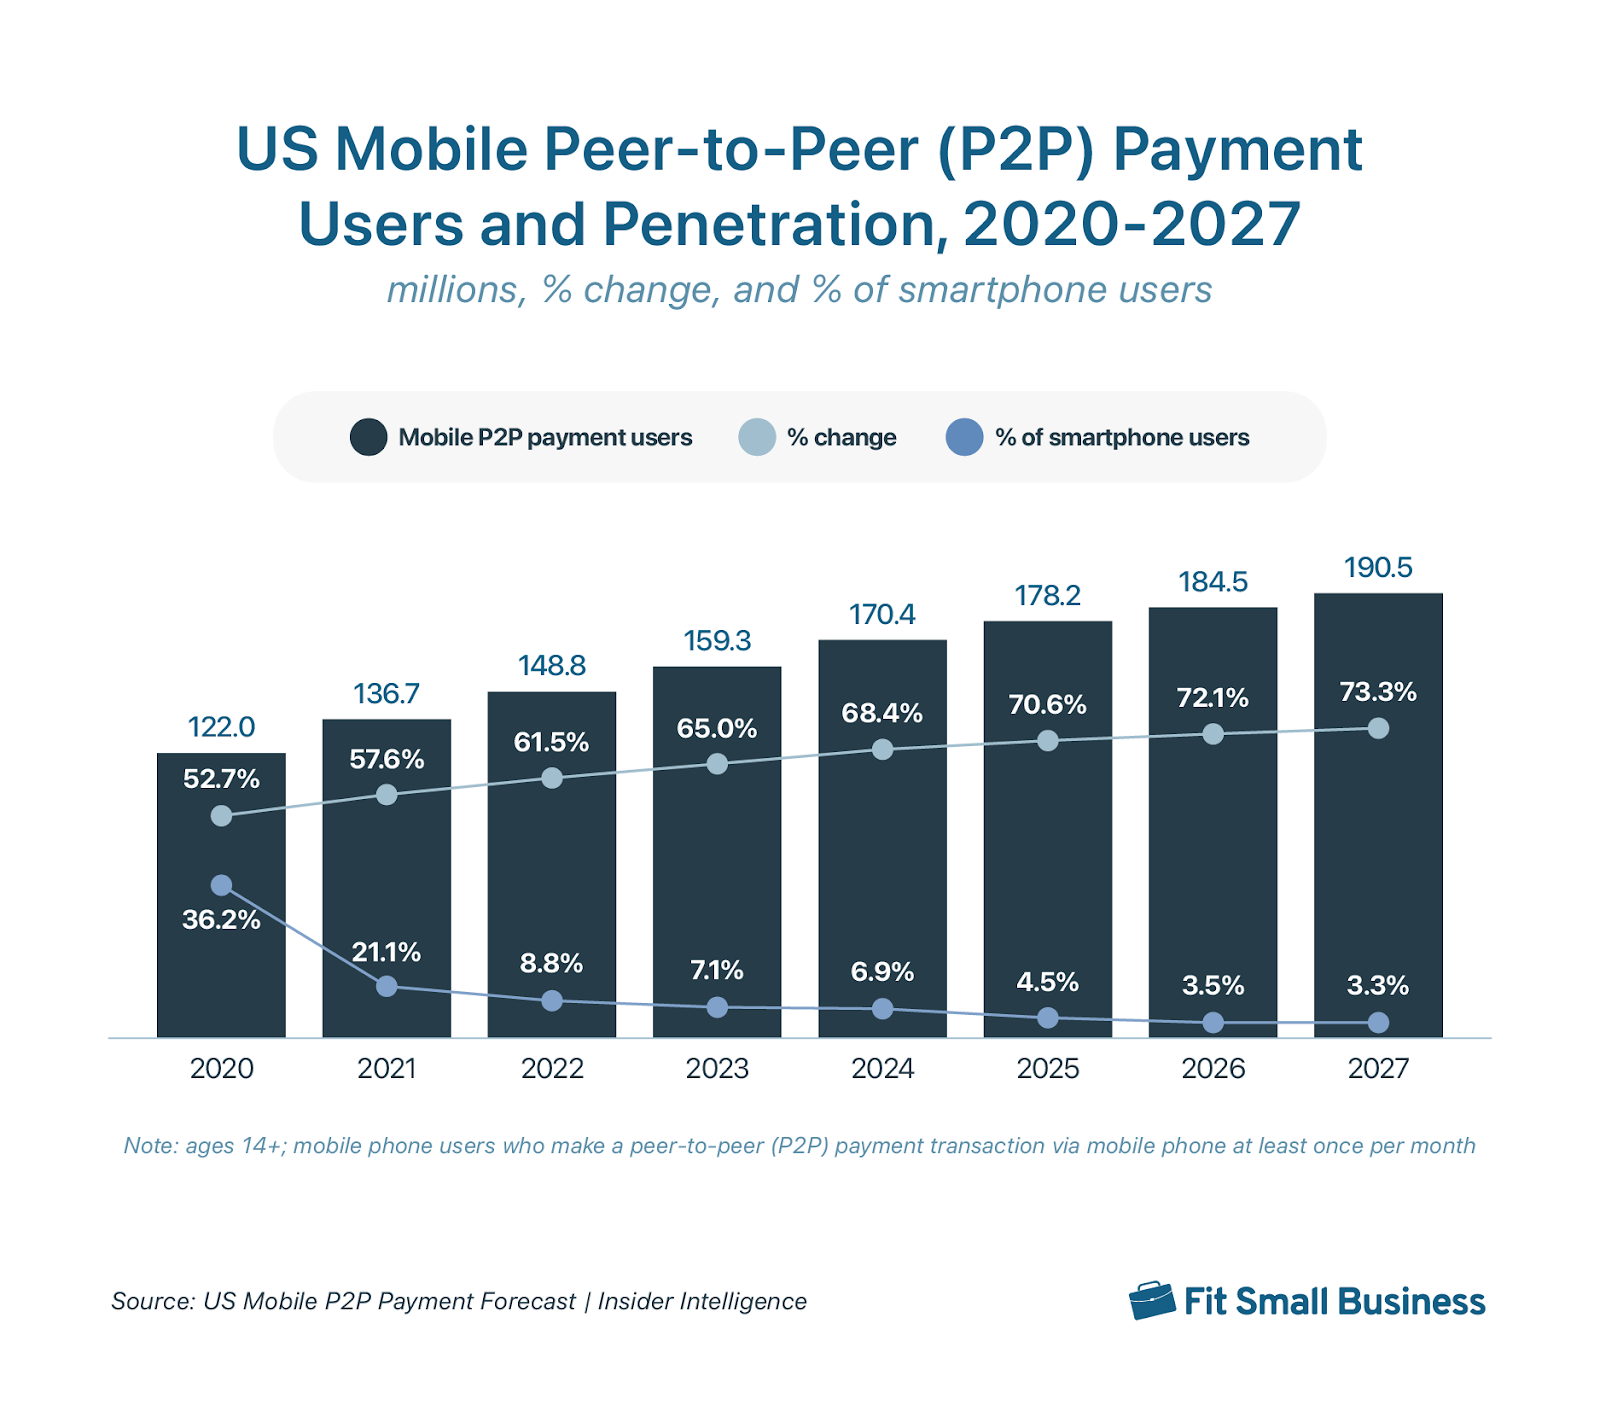 Bar graph showing the growth of peer-to-peer payment use from 2020 to 2027.